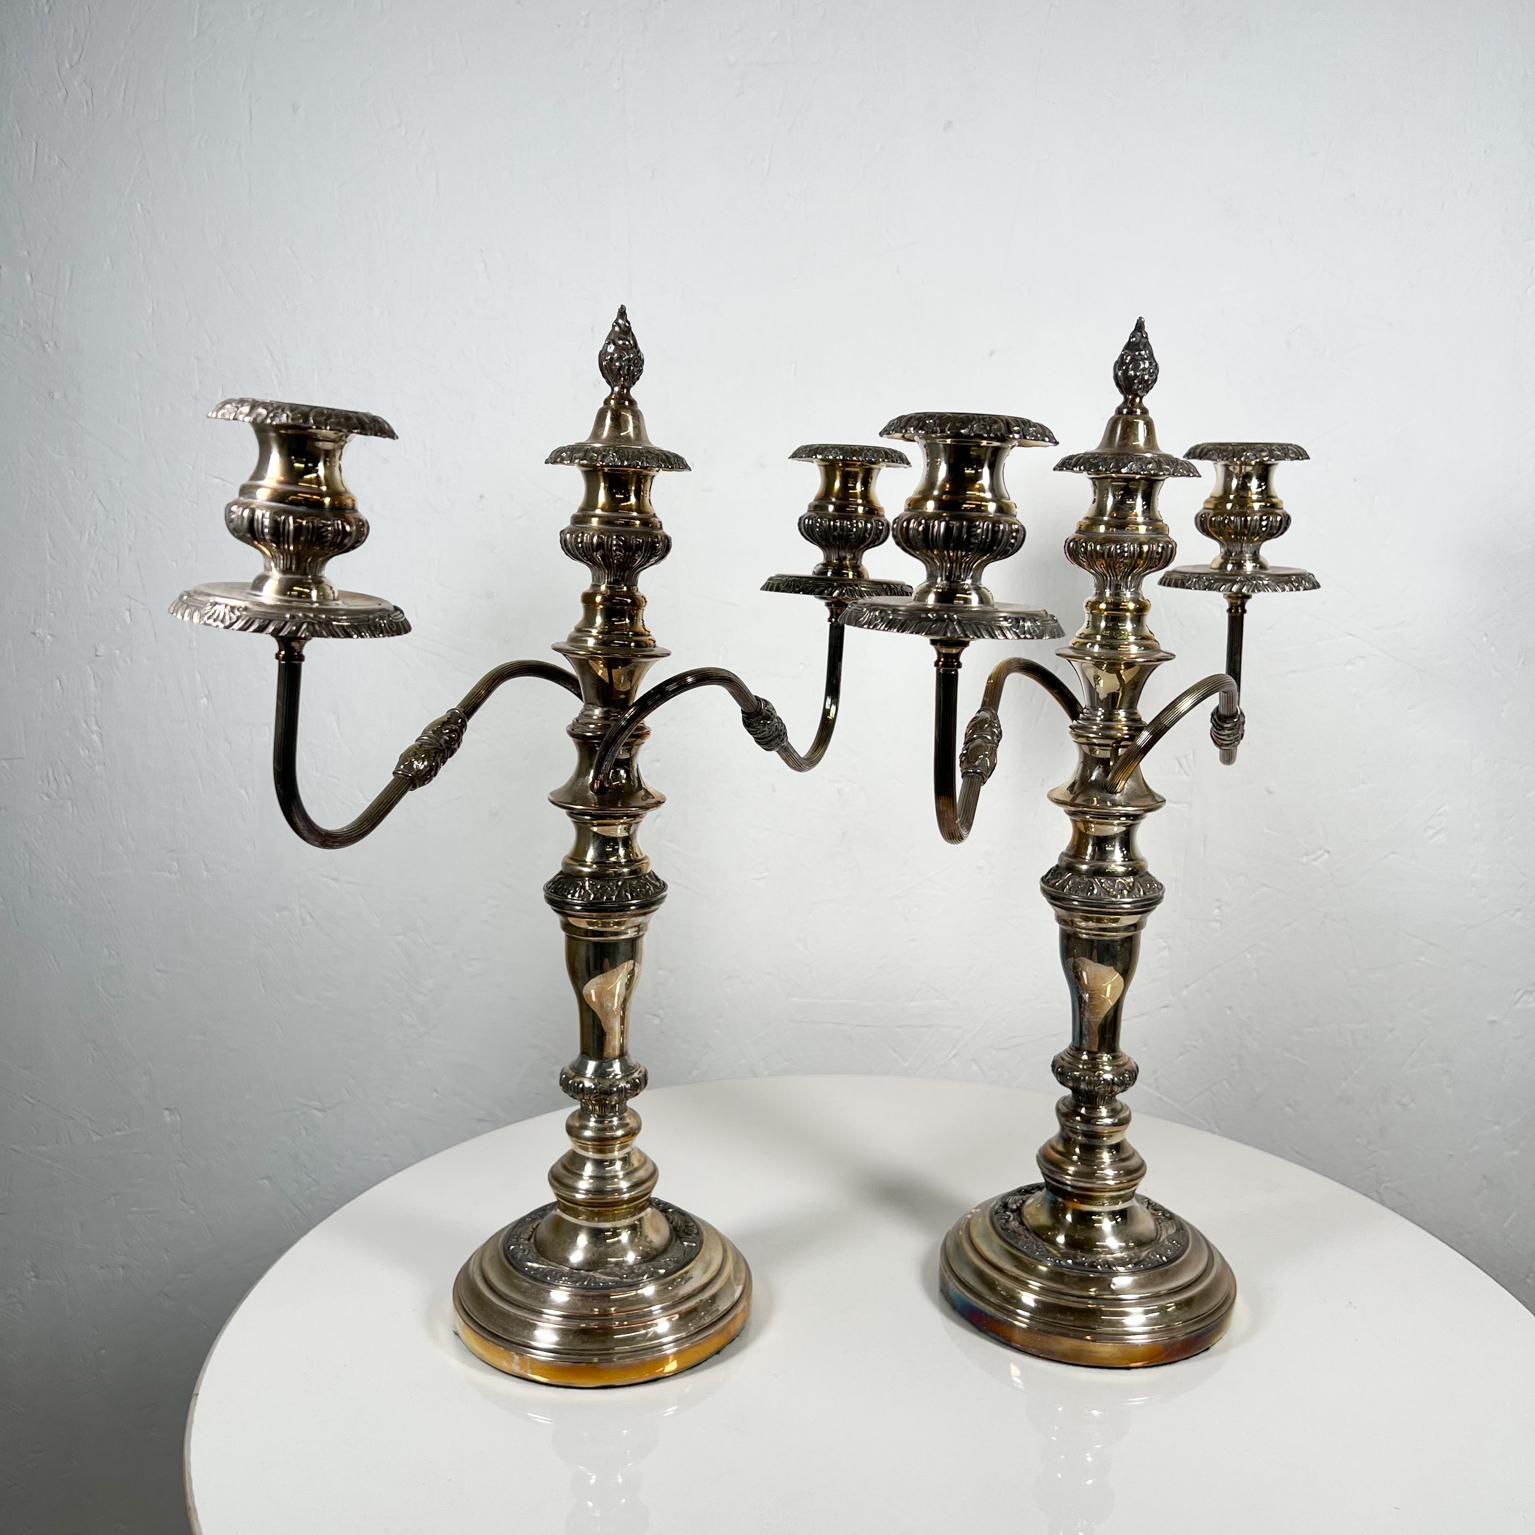 1940s Pair of Silverplate Candelabras by Goldfeder Silver Company New York 1